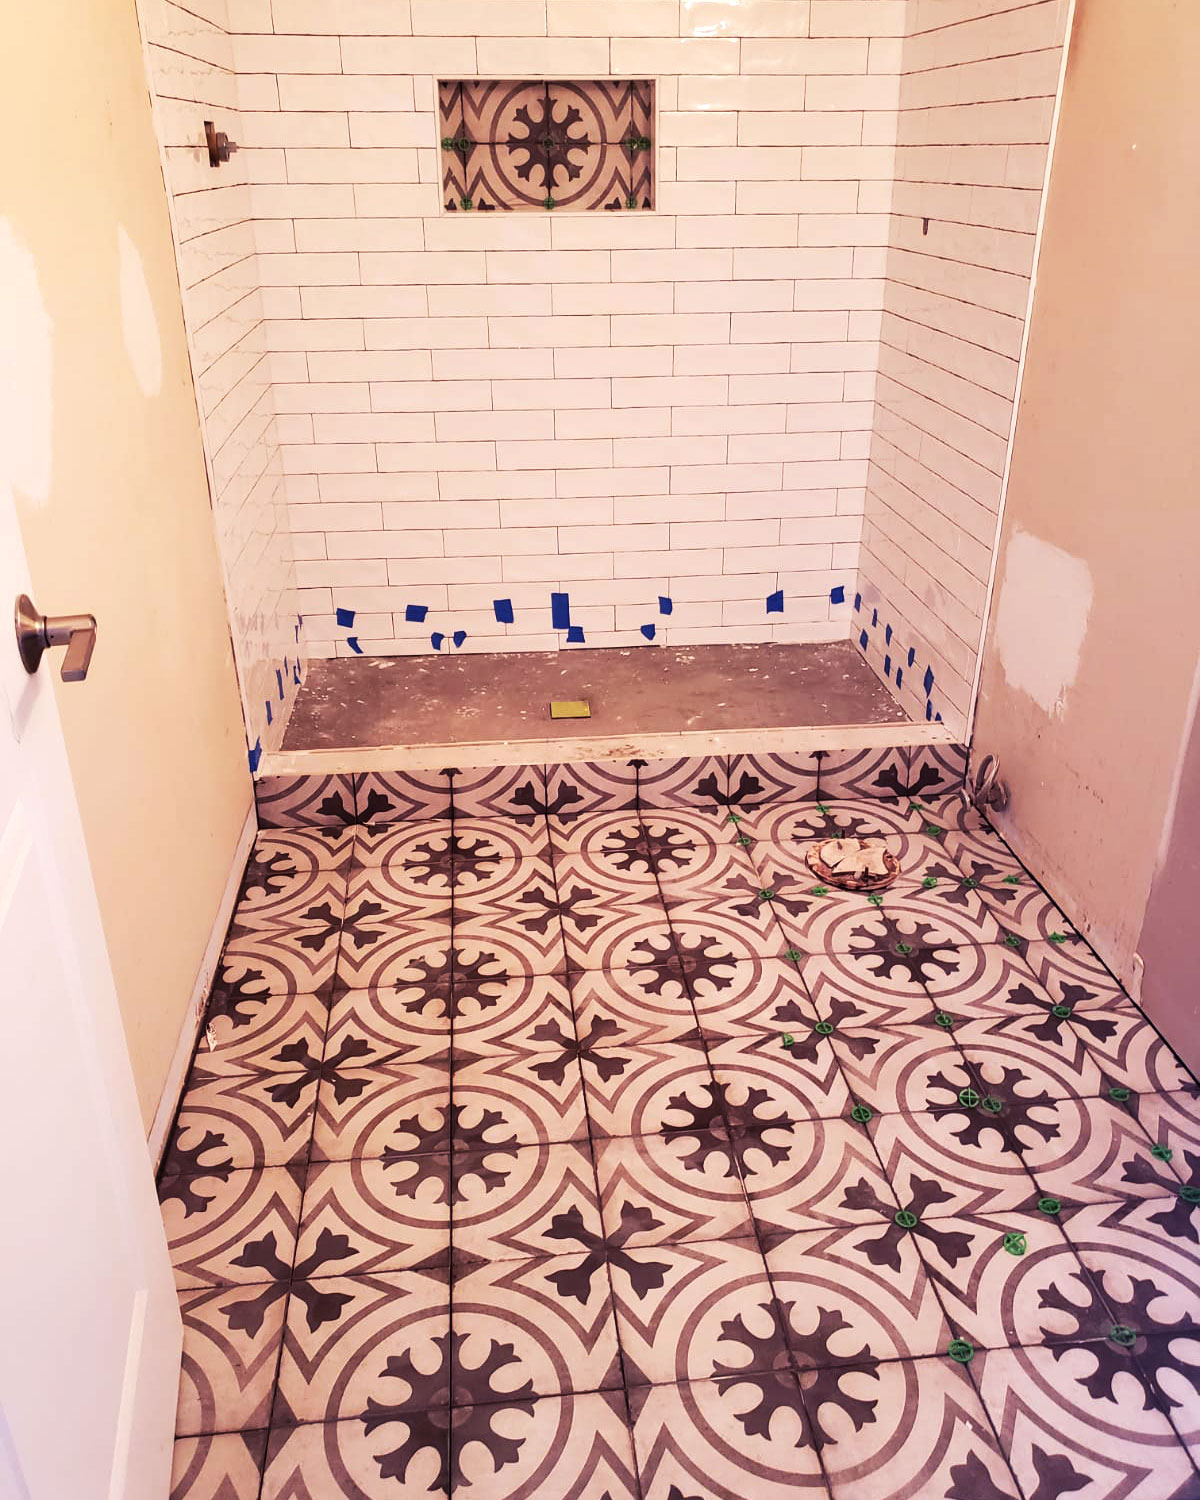 Bathroom tile with mosaic patterns